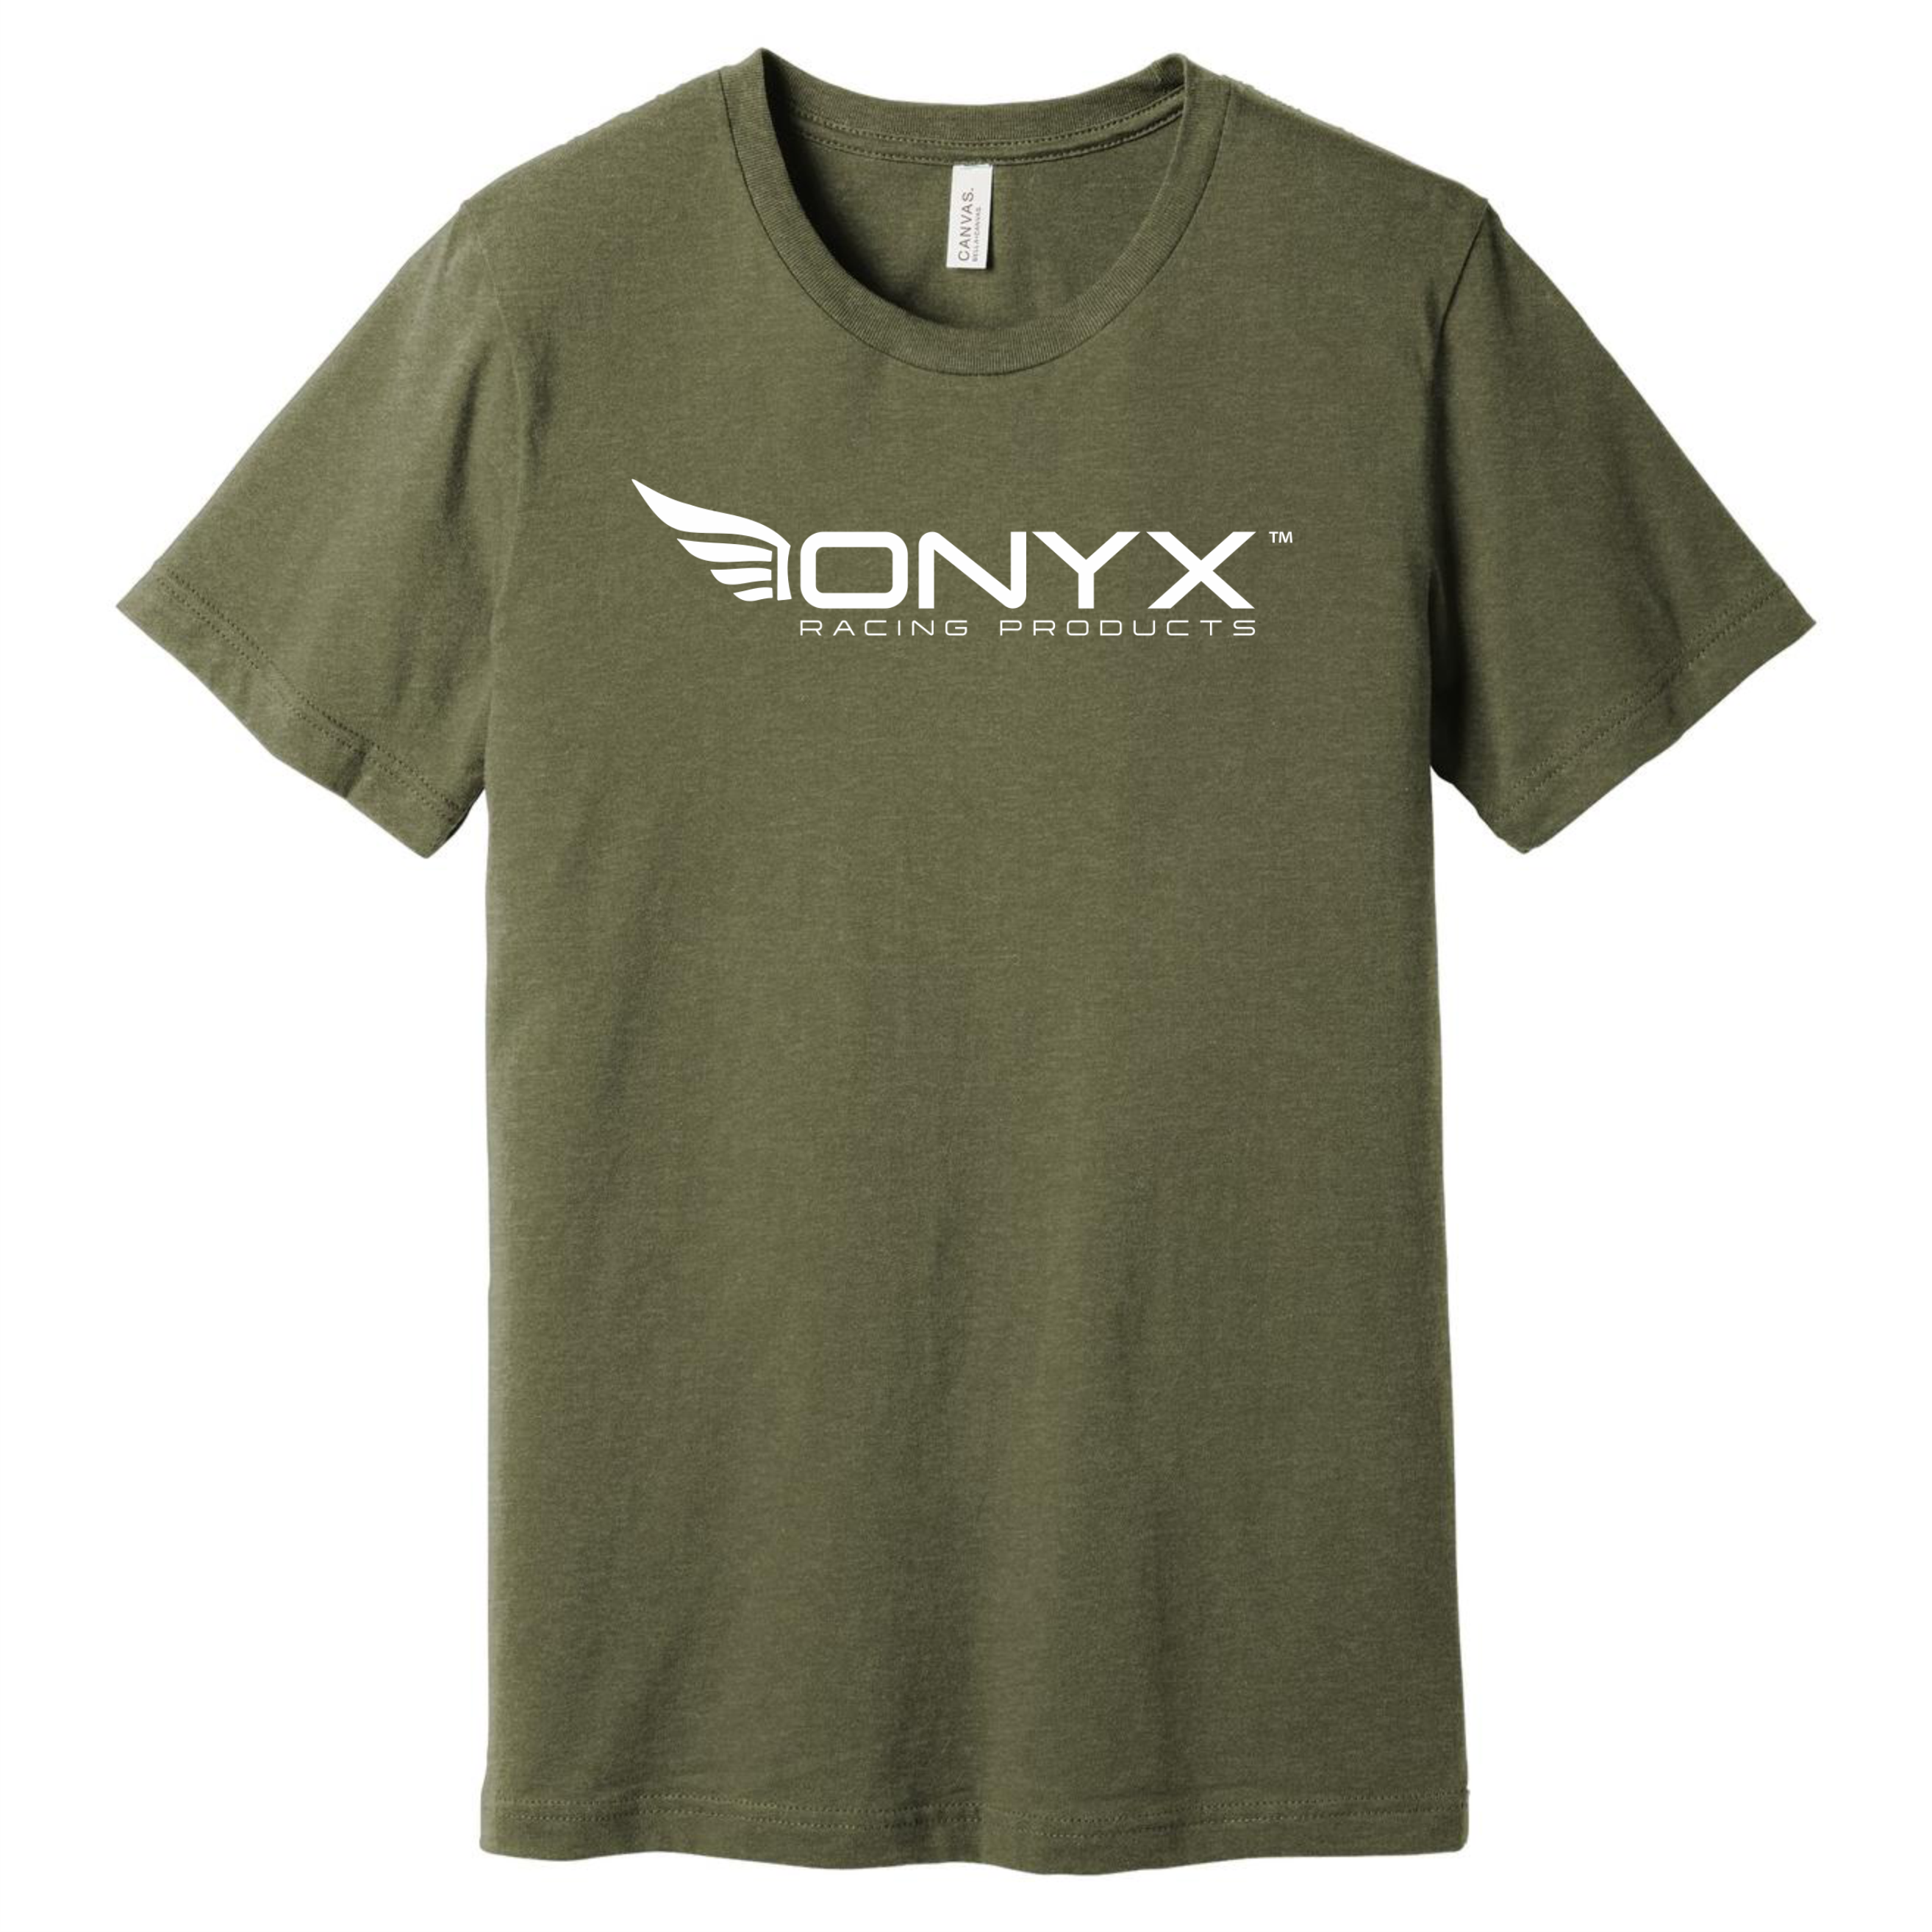 https://onyxrp.com/wp-content/uploads/New-shirt-front-white.png